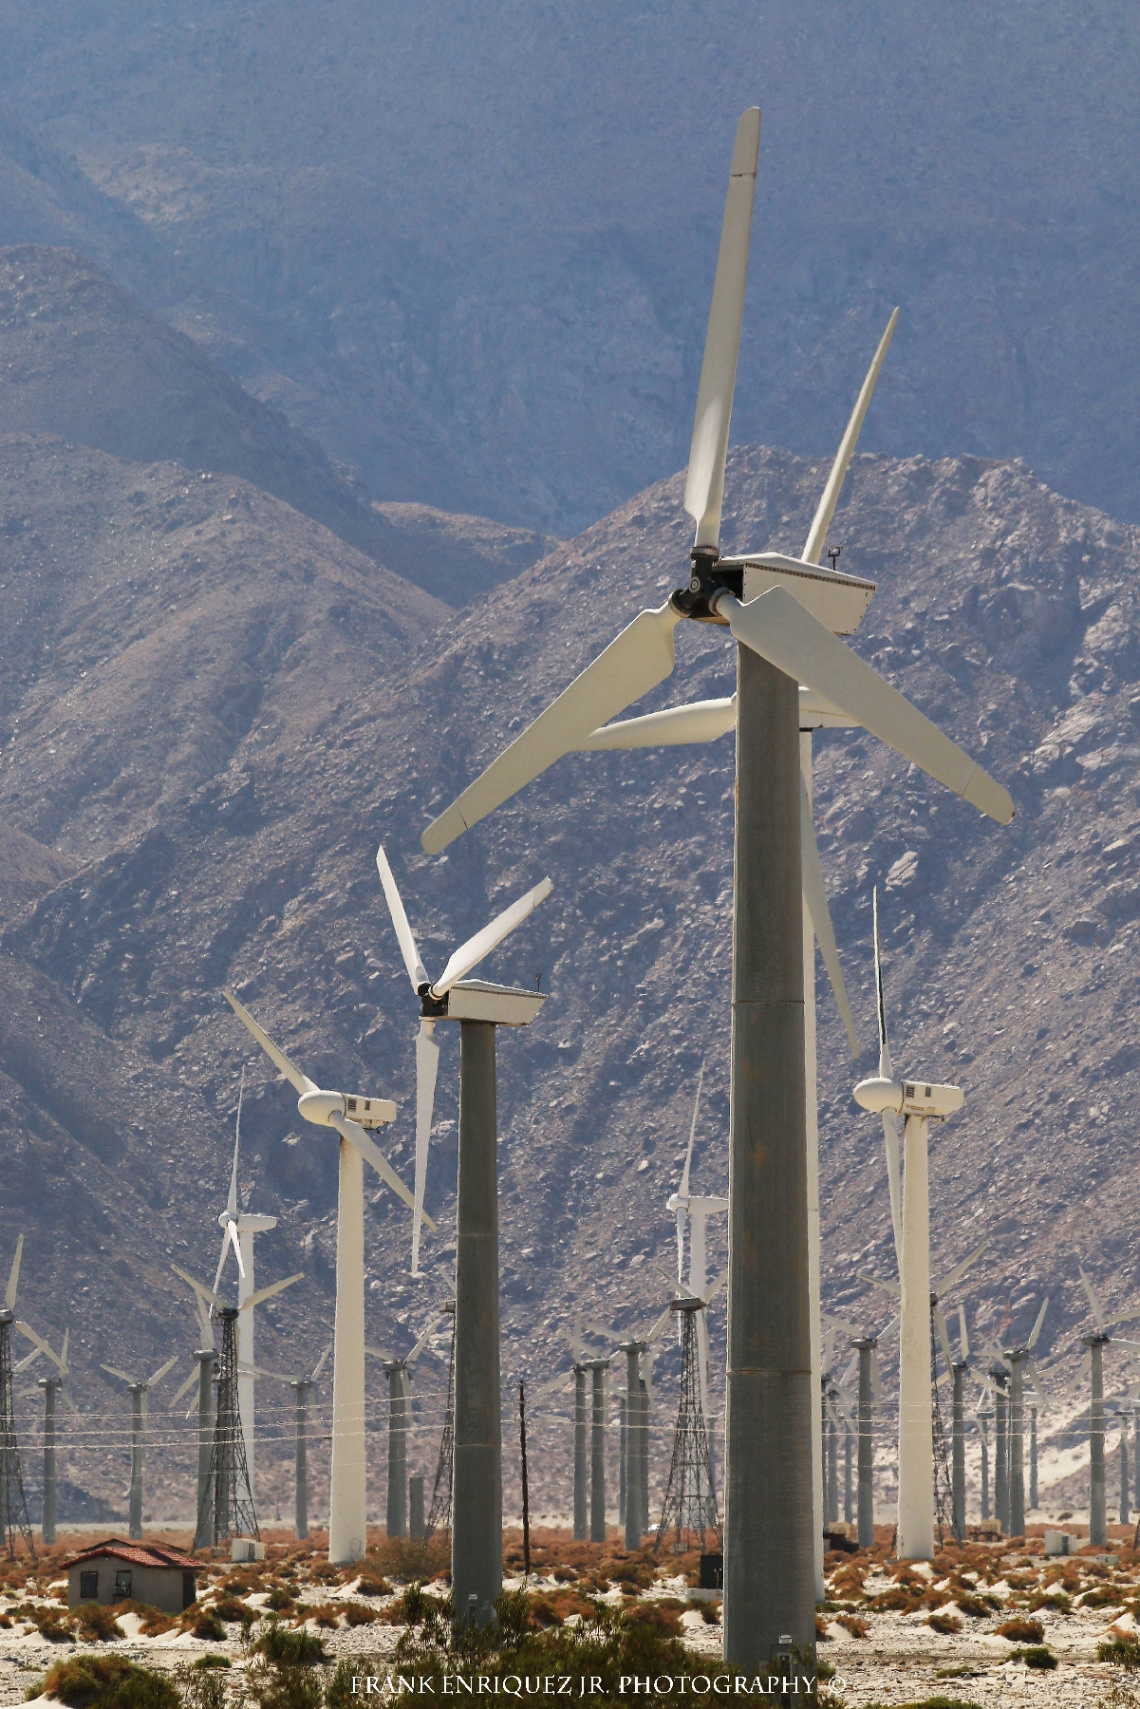 Calif. WindMills Outside Palm Springs